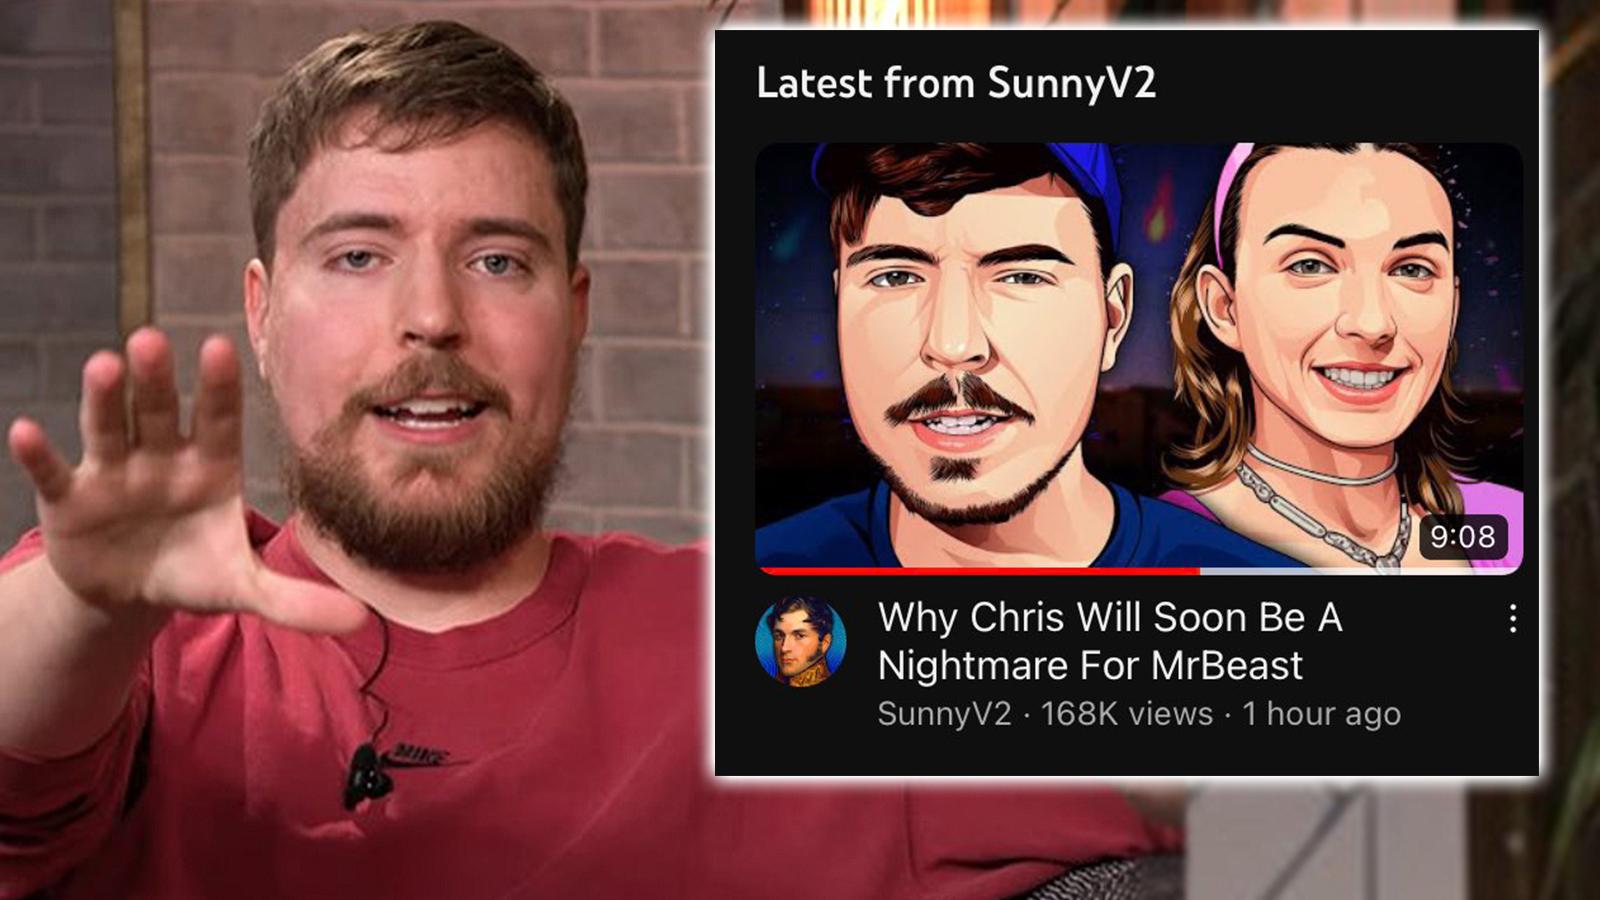 What Is Happening With Chris From MrBeast?